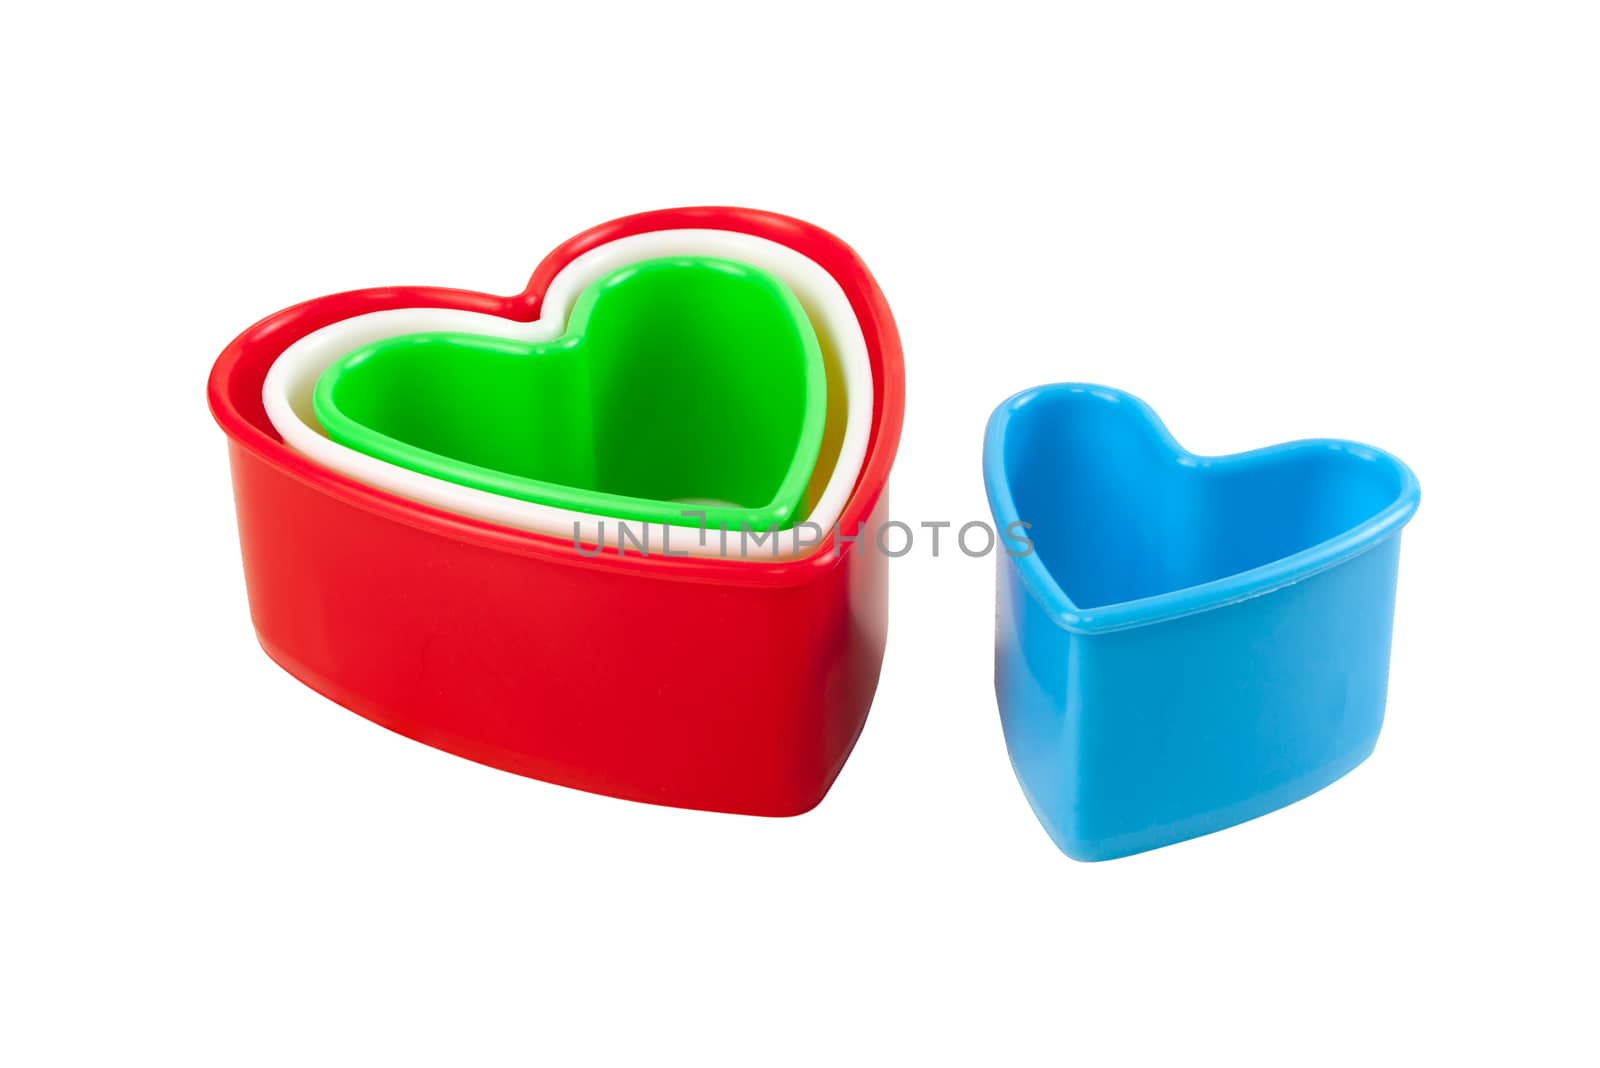 Idea for card Valentine day. Heart shaped cookie cutter on white background. Isolated on white with work paths.